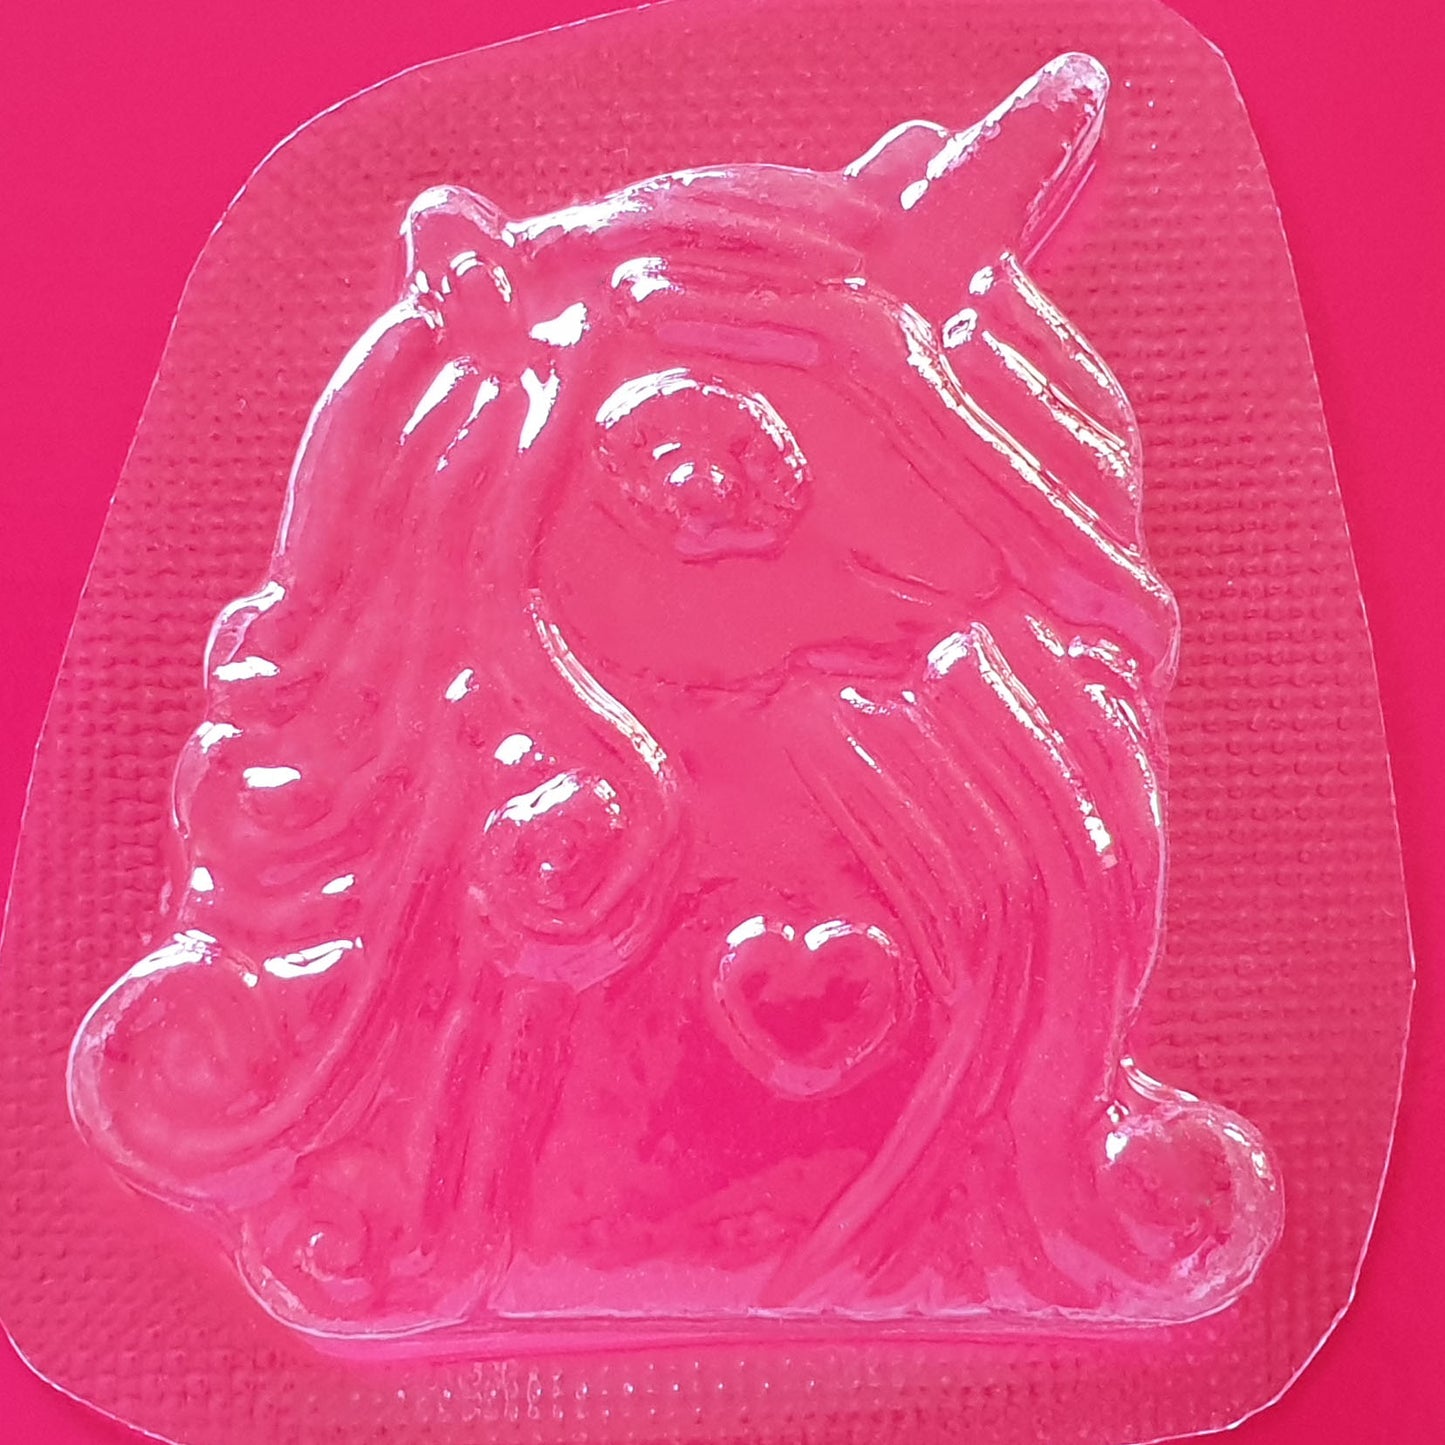 Yuna Unicorn Mould | Truly Personal | Bath Bomb, Soap, Resin, Chocolate, Jelly, Wax Melts Mold